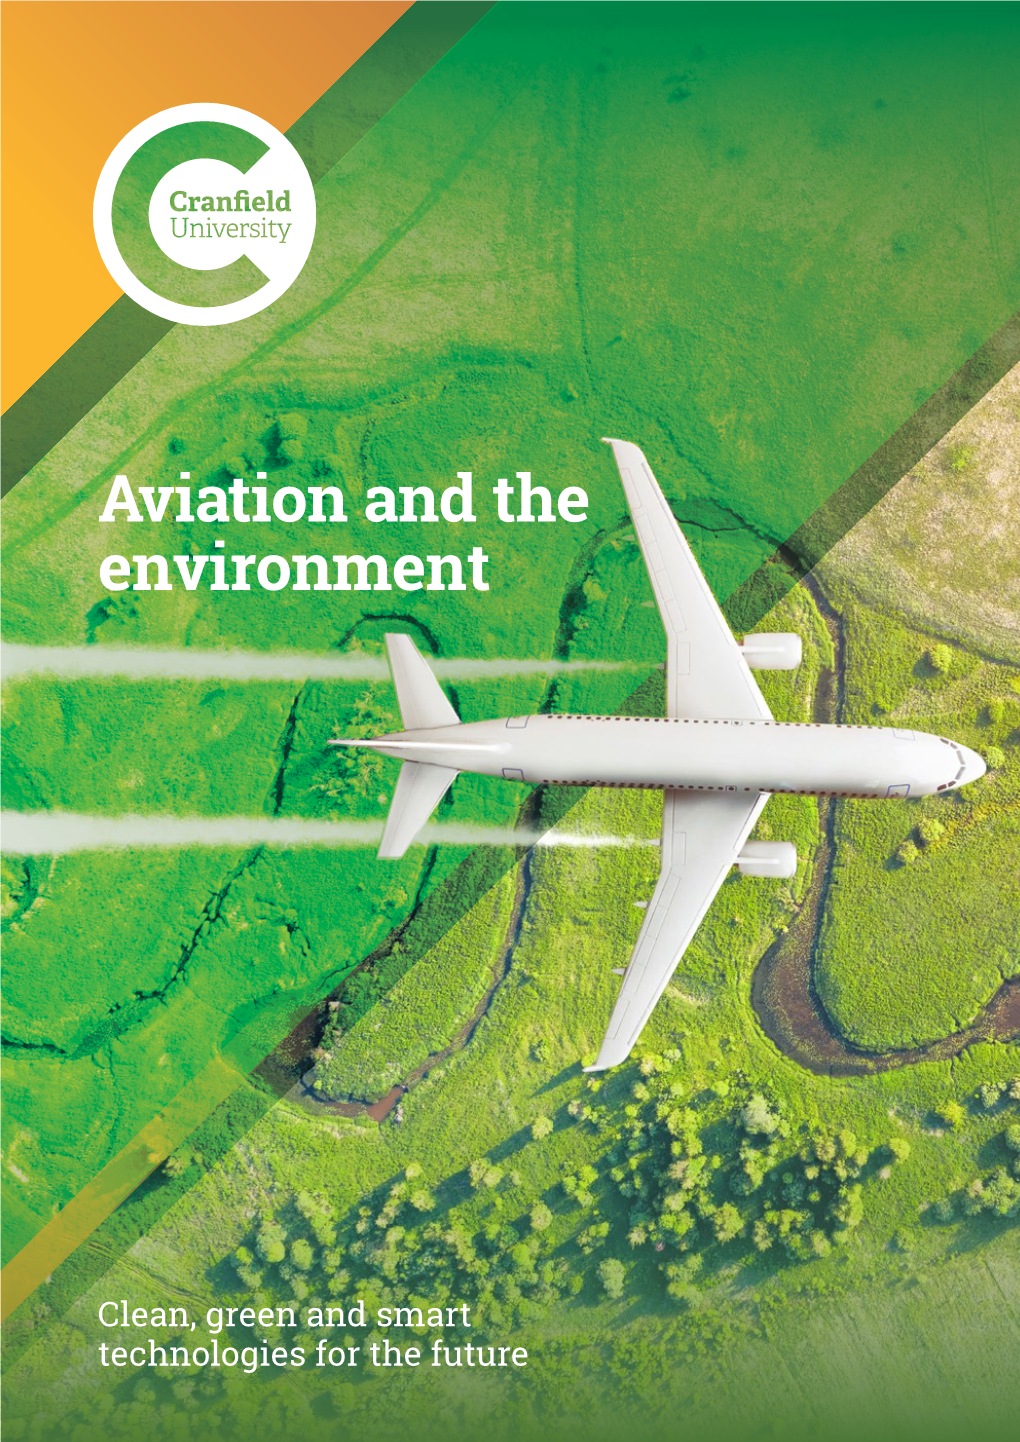 Aviation and the Environment Brochure